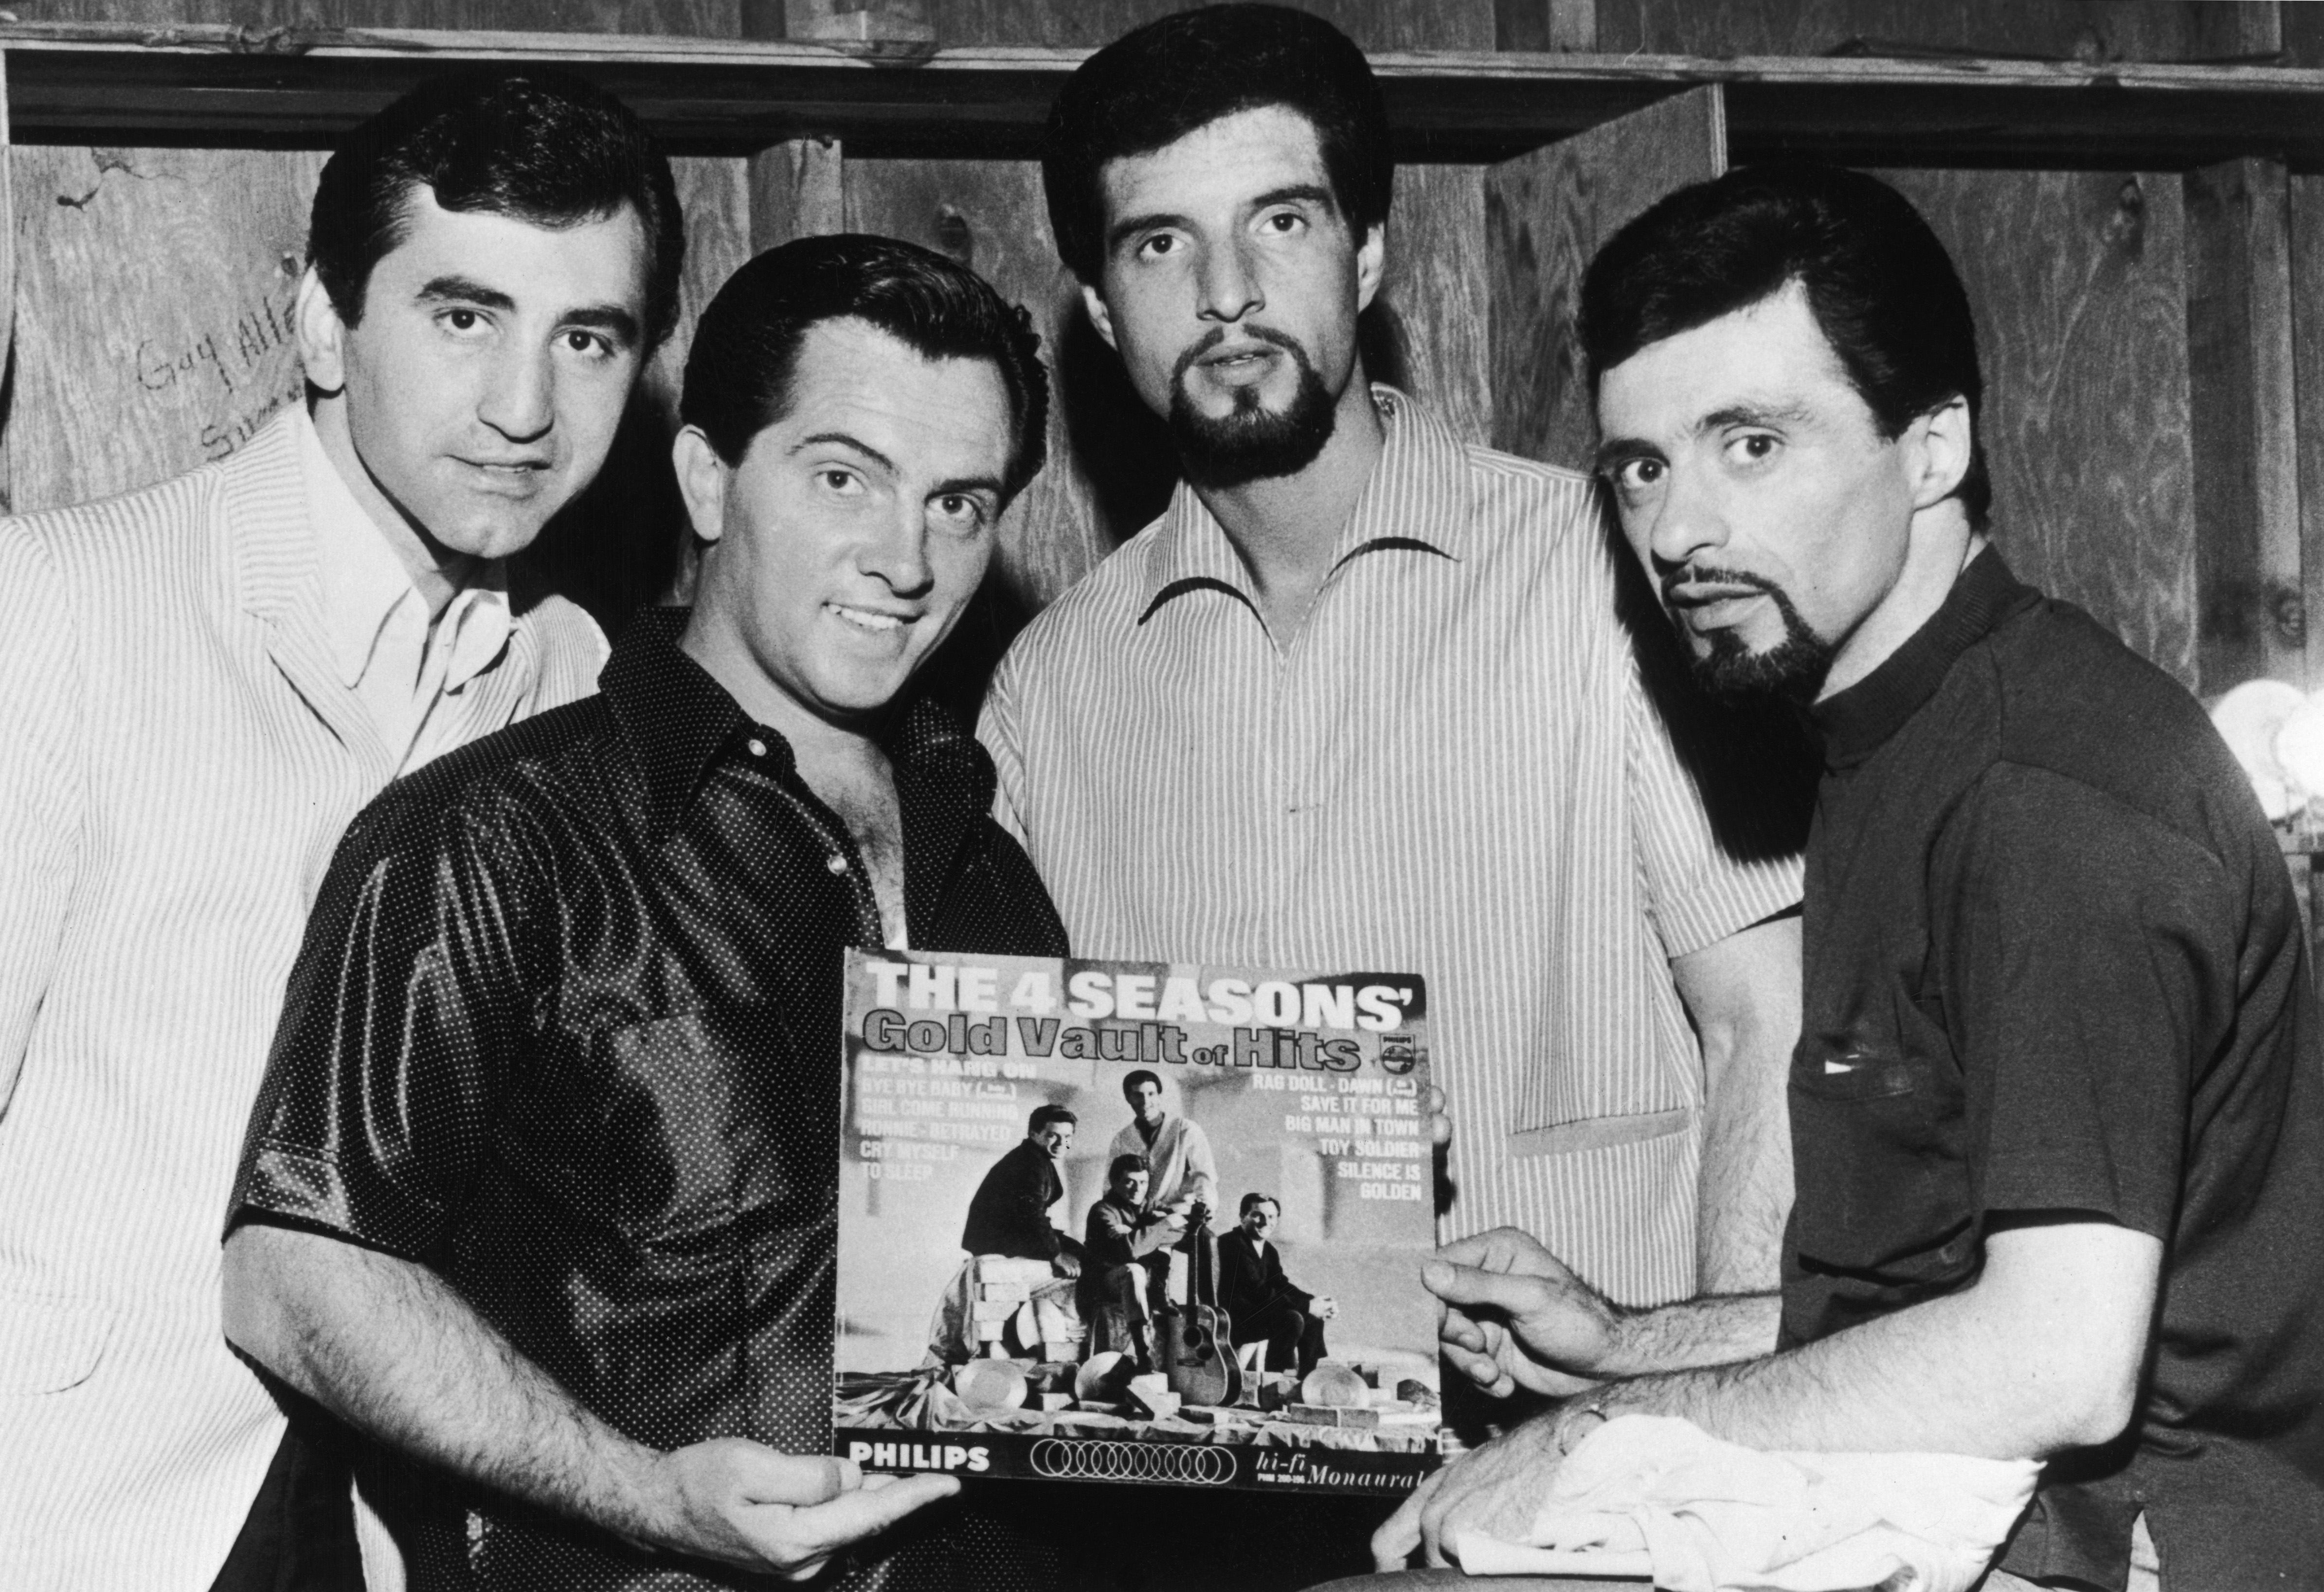 Joe Long, Tommy DeVito, Bob Gaudio, and Frankie Valli of The Four Seasons with their album "The 4 Seasons Gold Vault of Hits," circa 1966 | Source: Getty Images